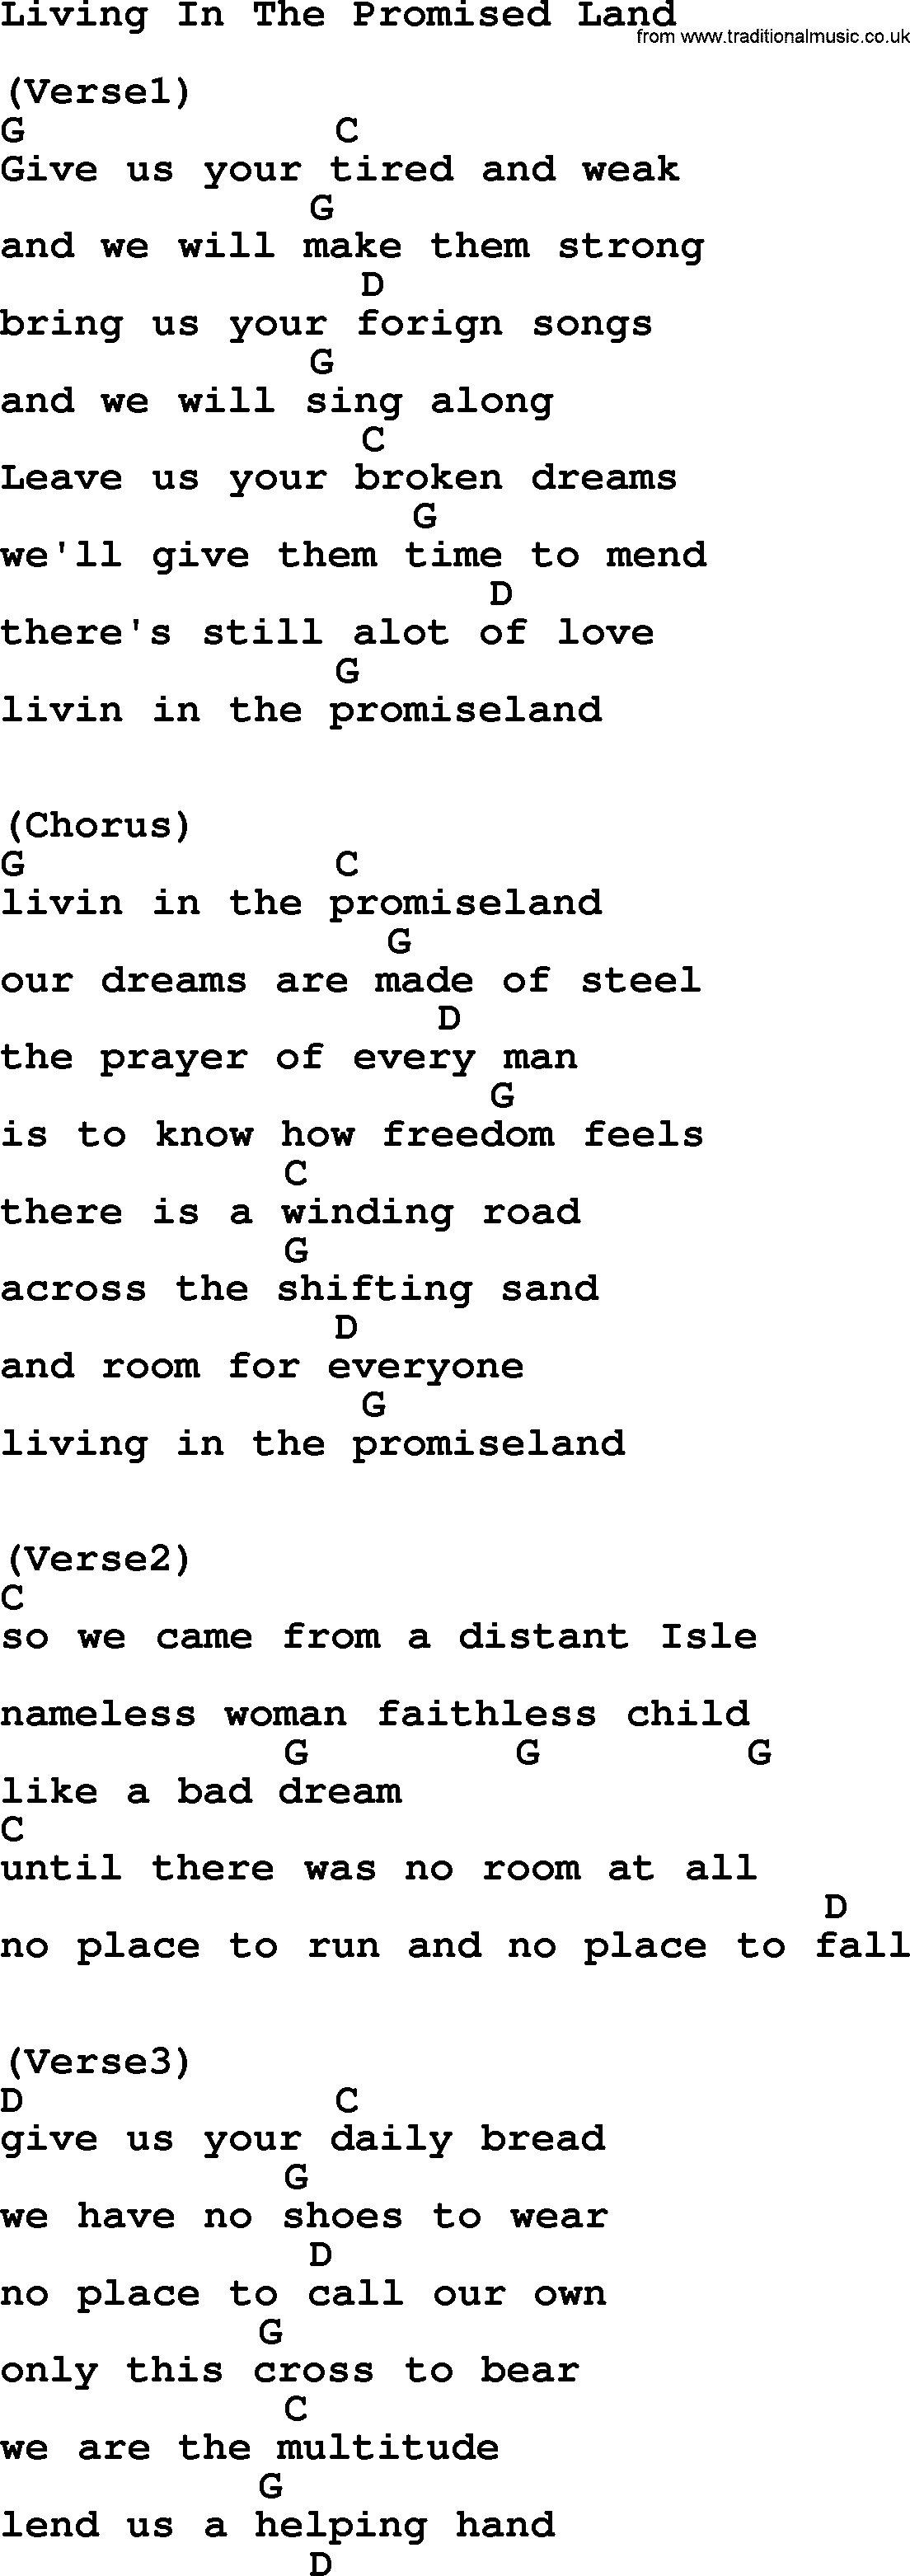 Willie Nelson song: Living In The Promised Land, lyrics and chords